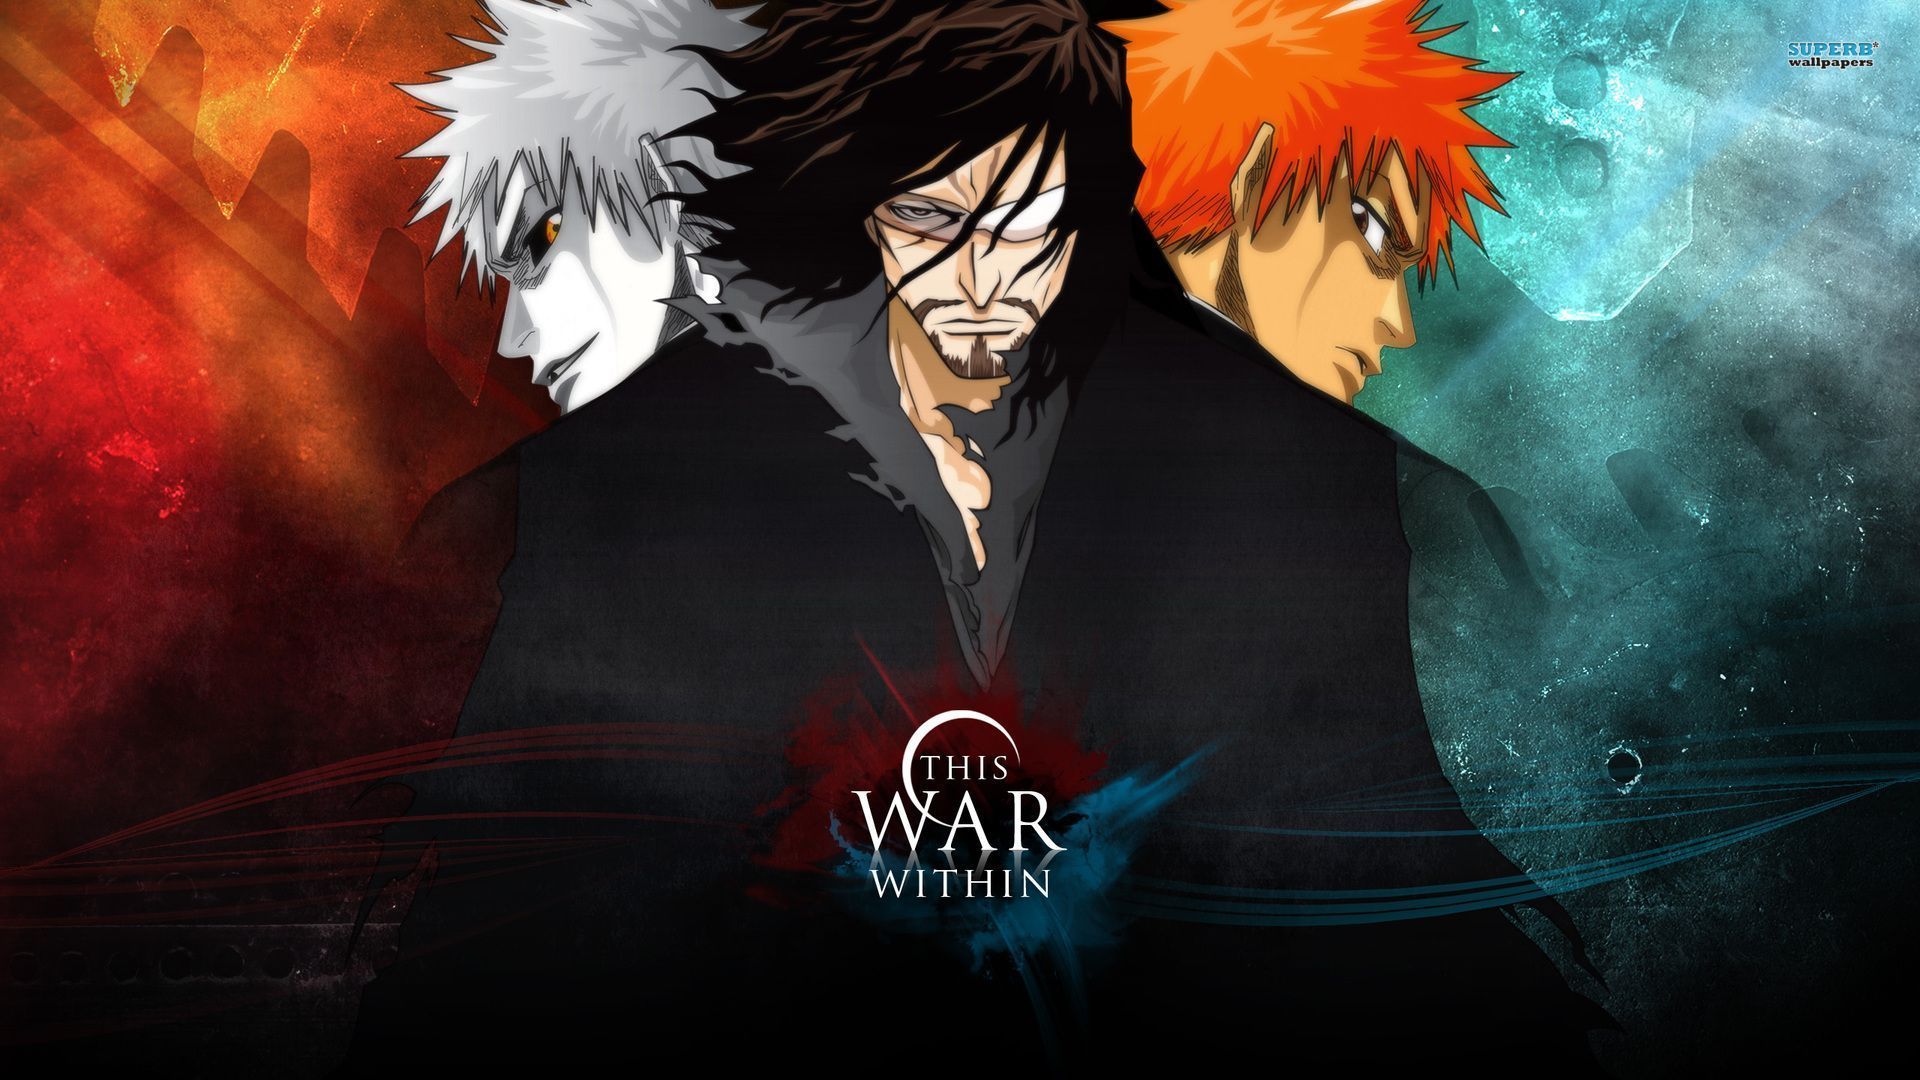 Awesome Wallpaper For Bleach Lovers Of